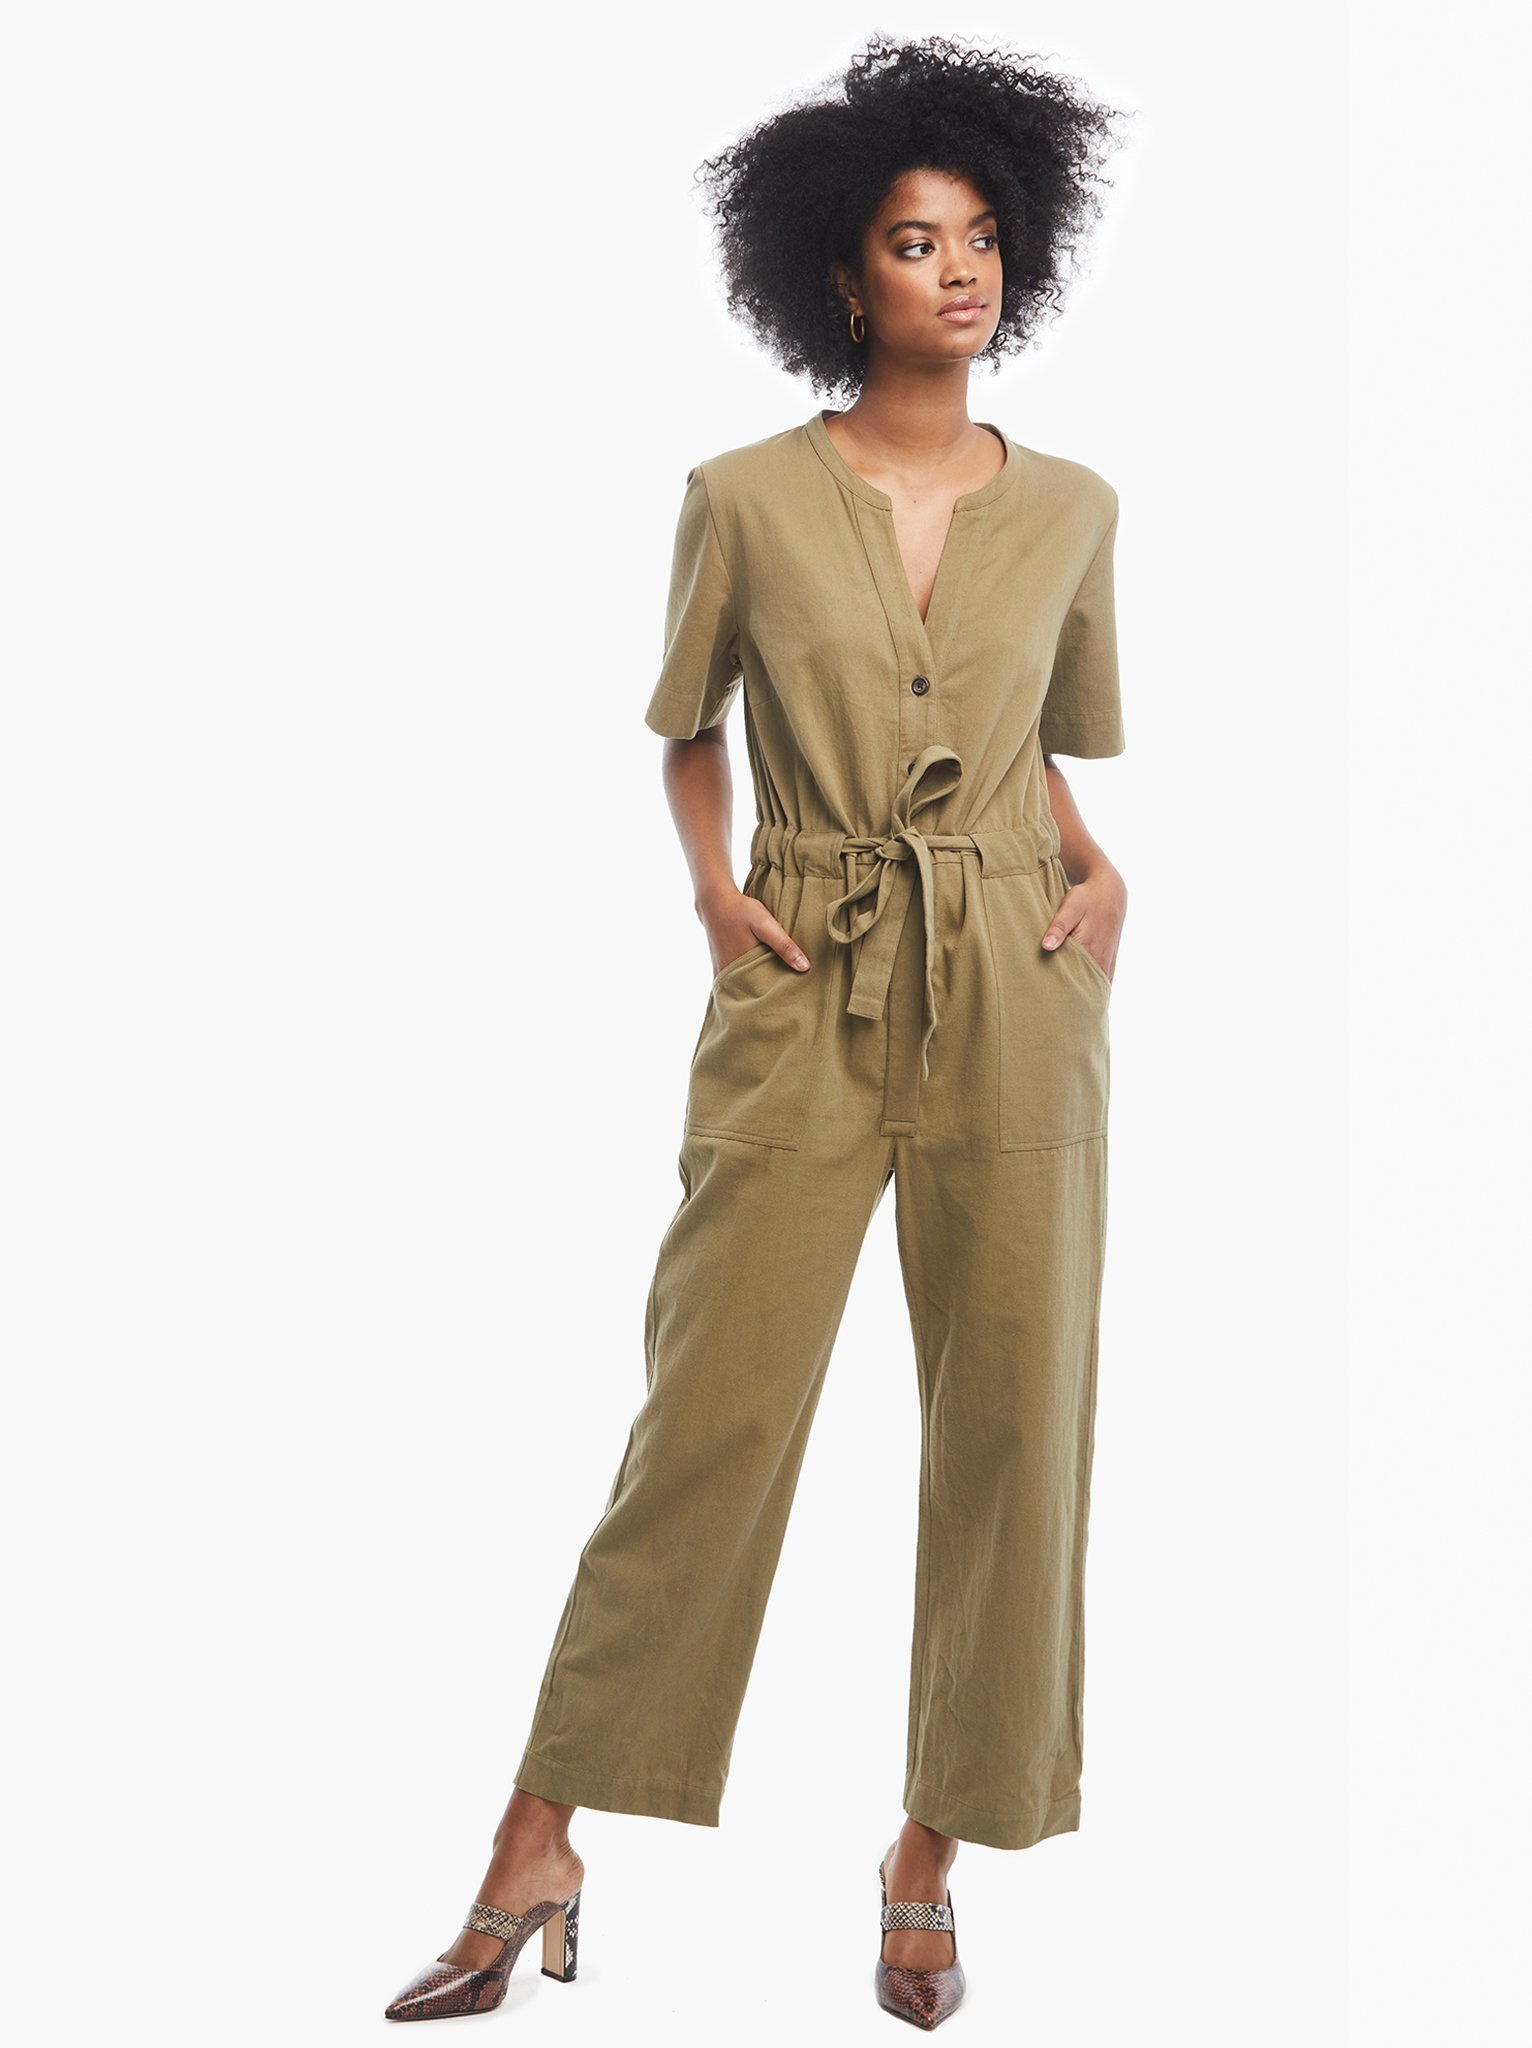 SHIRLEY-JUMPSUIT-OLIVE-FRONT_Sized_2048x2048.jpg